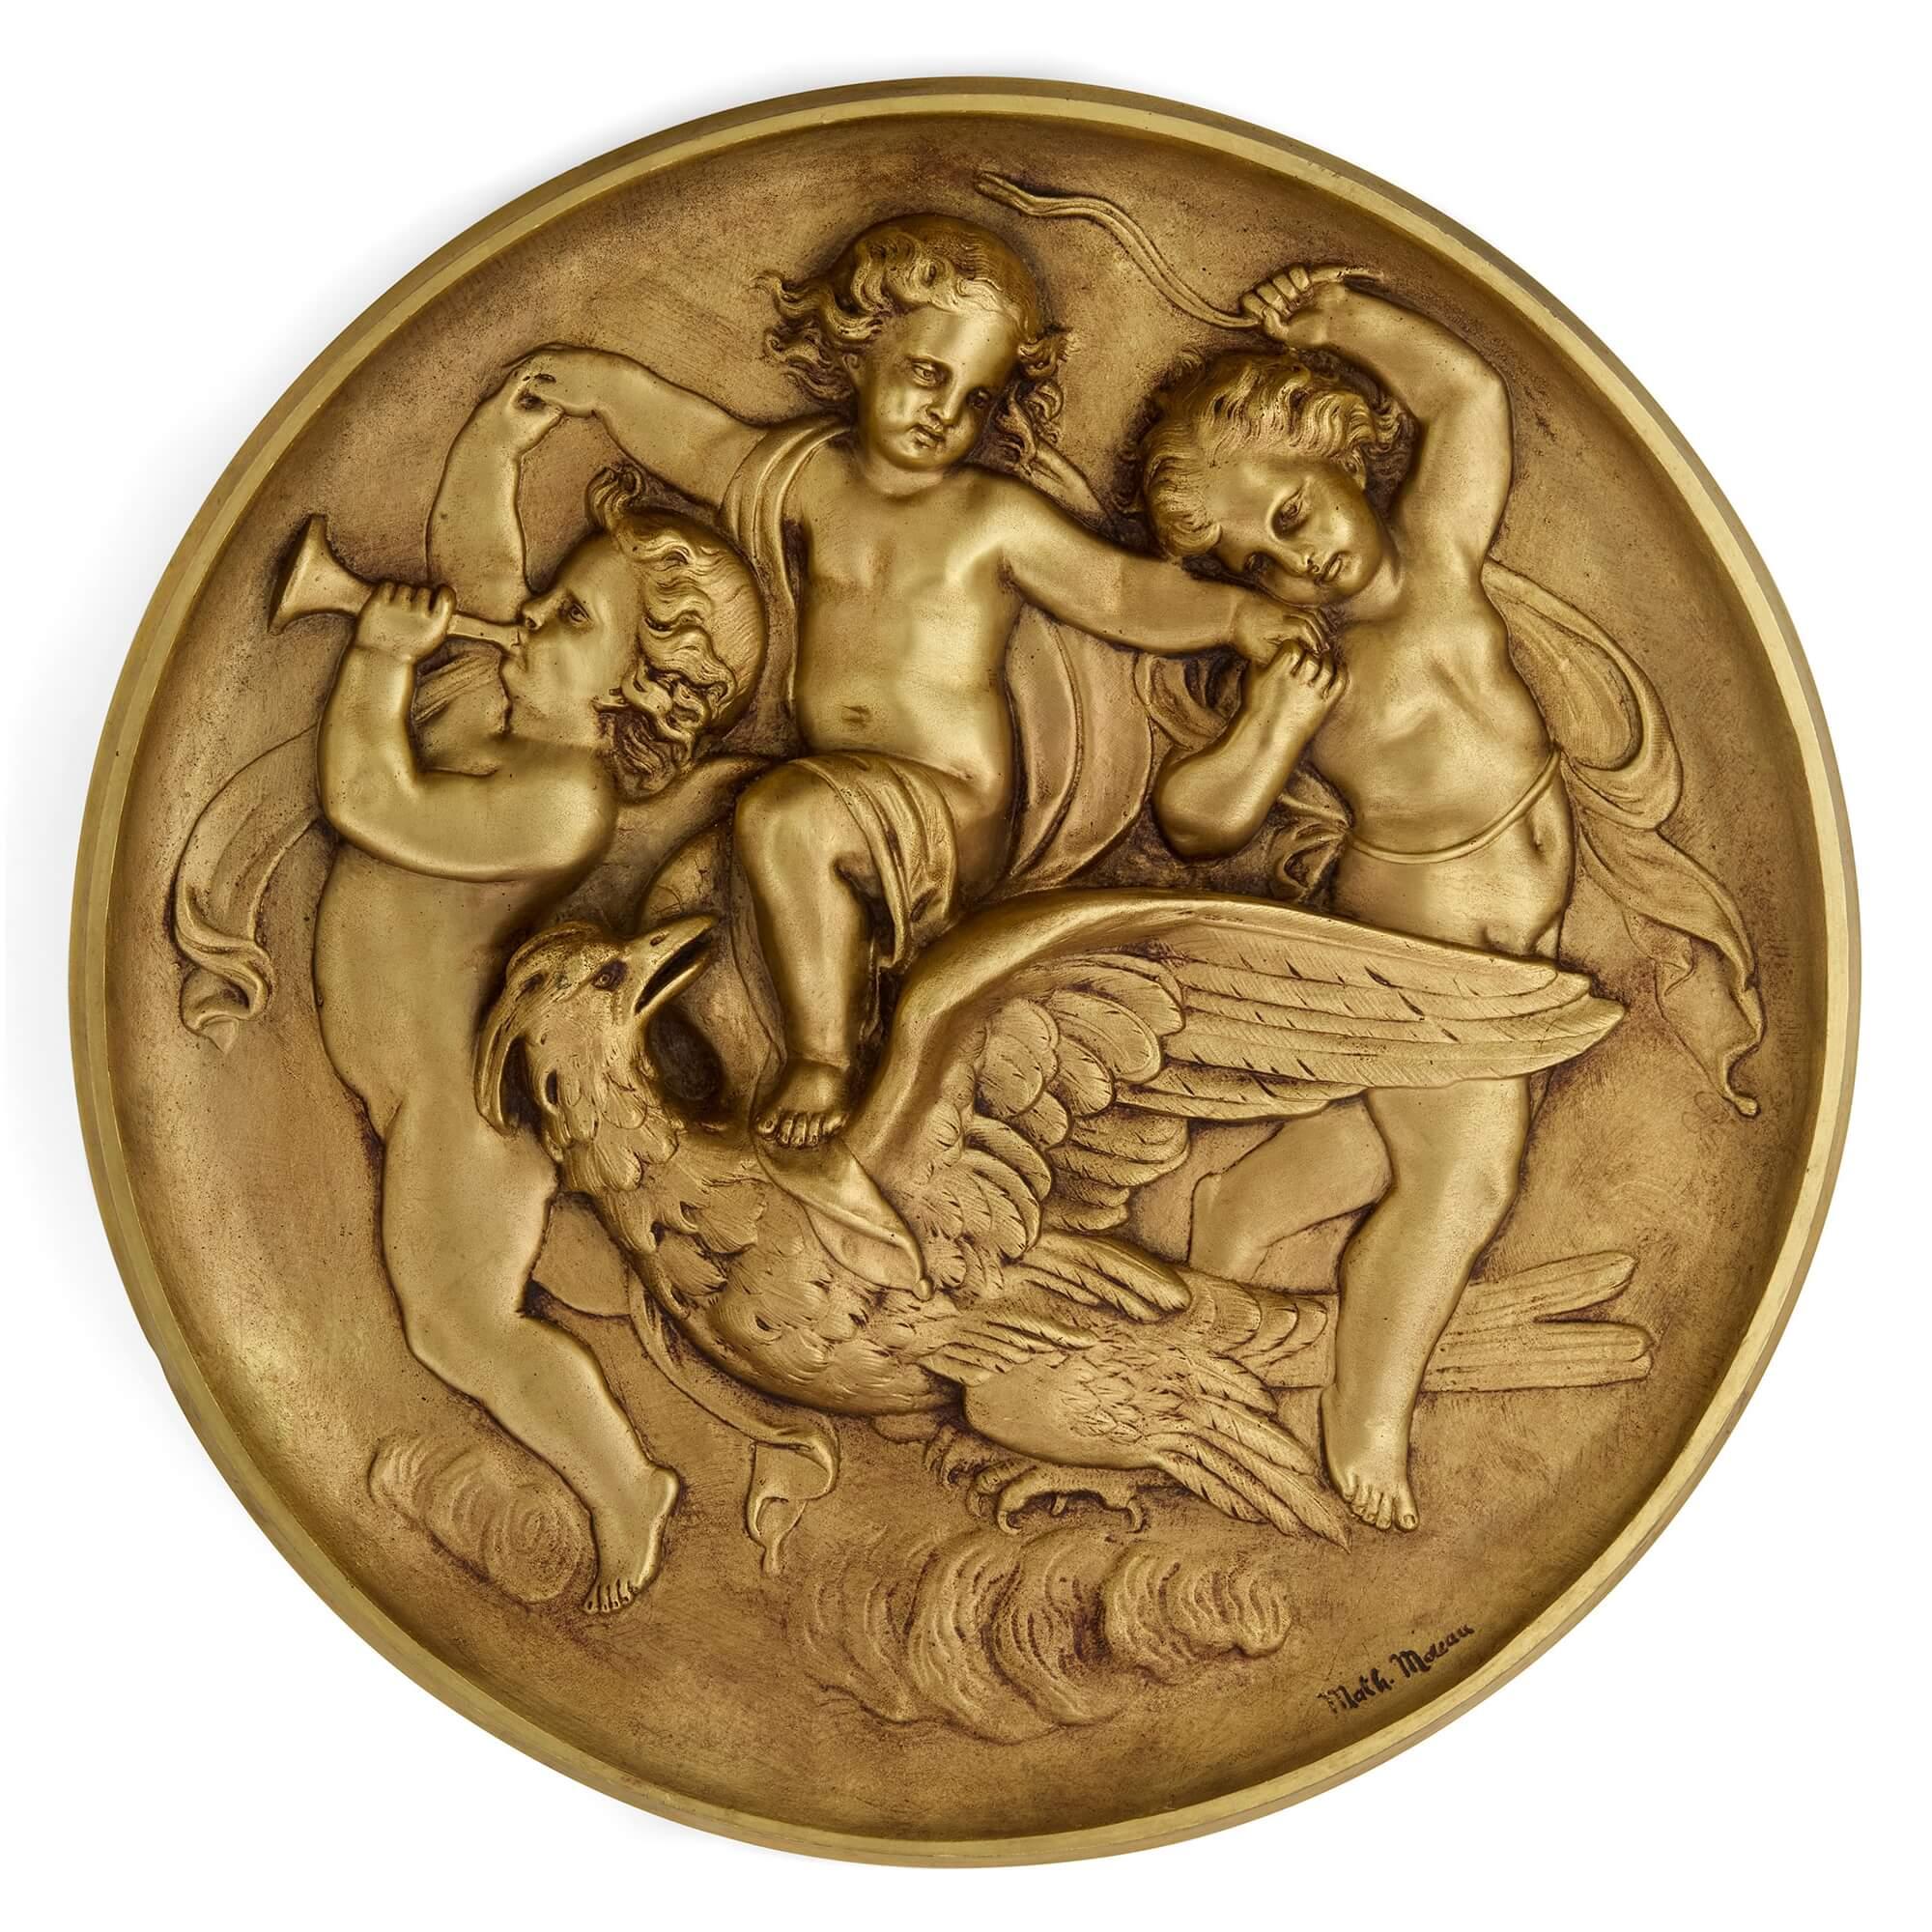 Set of four antique ormolu roundels by Mathurin Moreau 
French, Late 19th Century 
Height 3cm, diameter 44cm

This set of four sculptural panels is crafted by the renowned French metalworker Mathurin Moreau (1822-1912). From a family of sculptors,